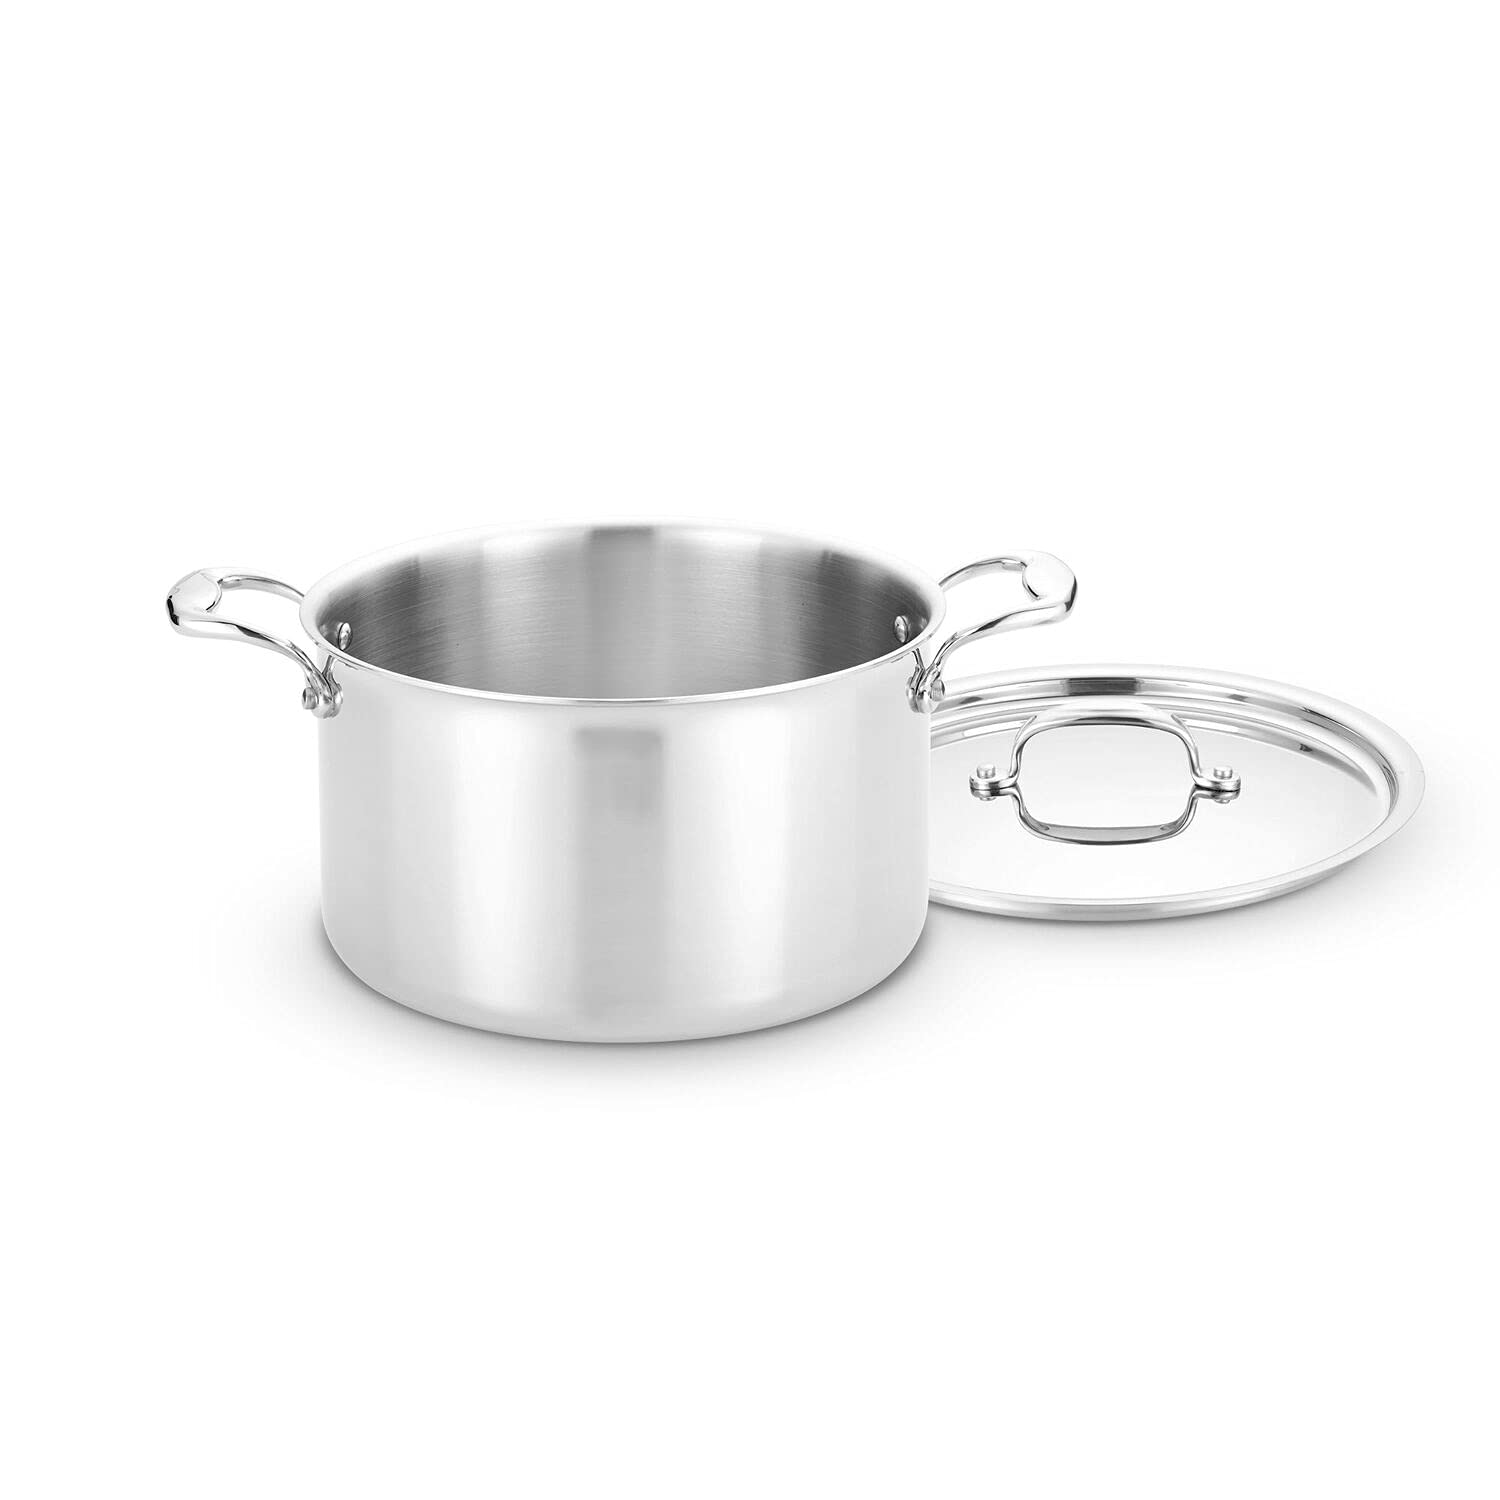 Heritage Steel 8 Quart Stock Pot with Lid - Titanium Strengthened 316Ti Stainless Steel with 5-Ply Construction - Induction-Ready and Fully Clad, Made in USA